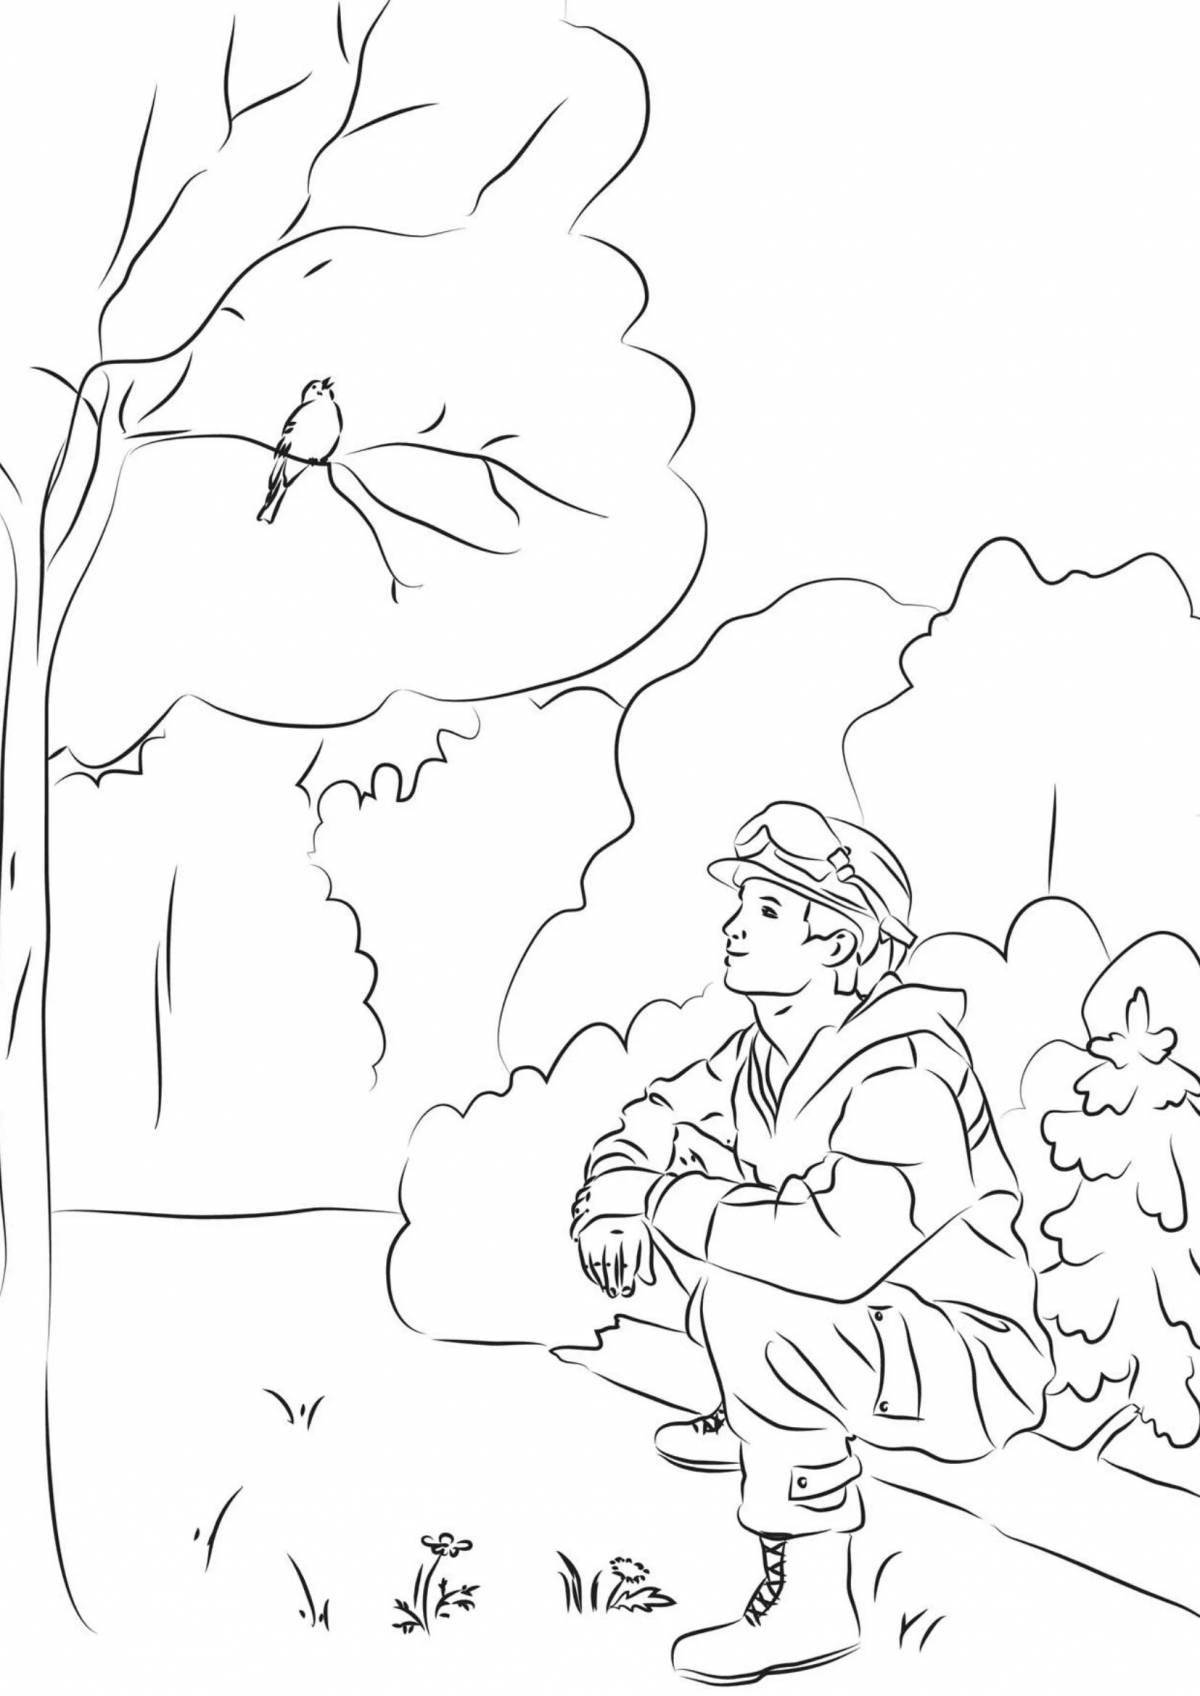 Coloring page majestic forest fire rescue